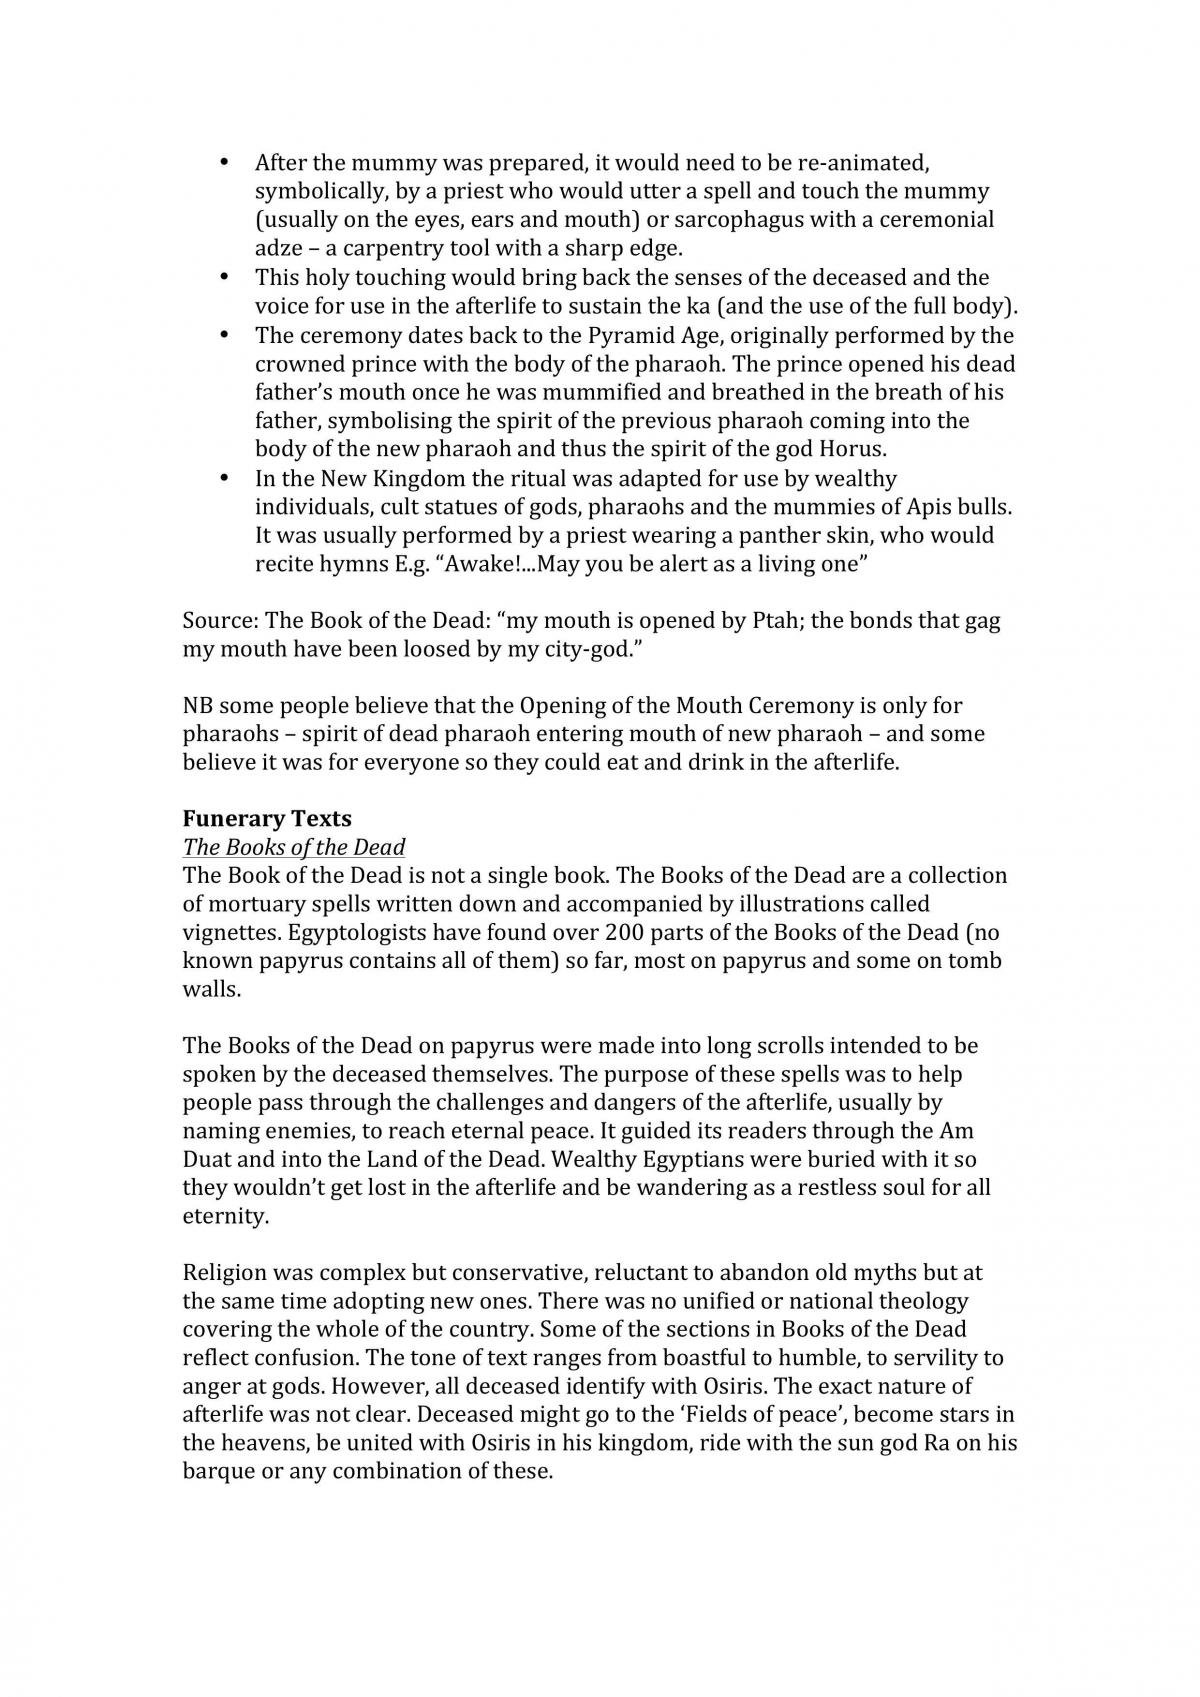 Society in New Kingdom Egypt to the Death of Amenhotep III Band 6 Notes - Page 63